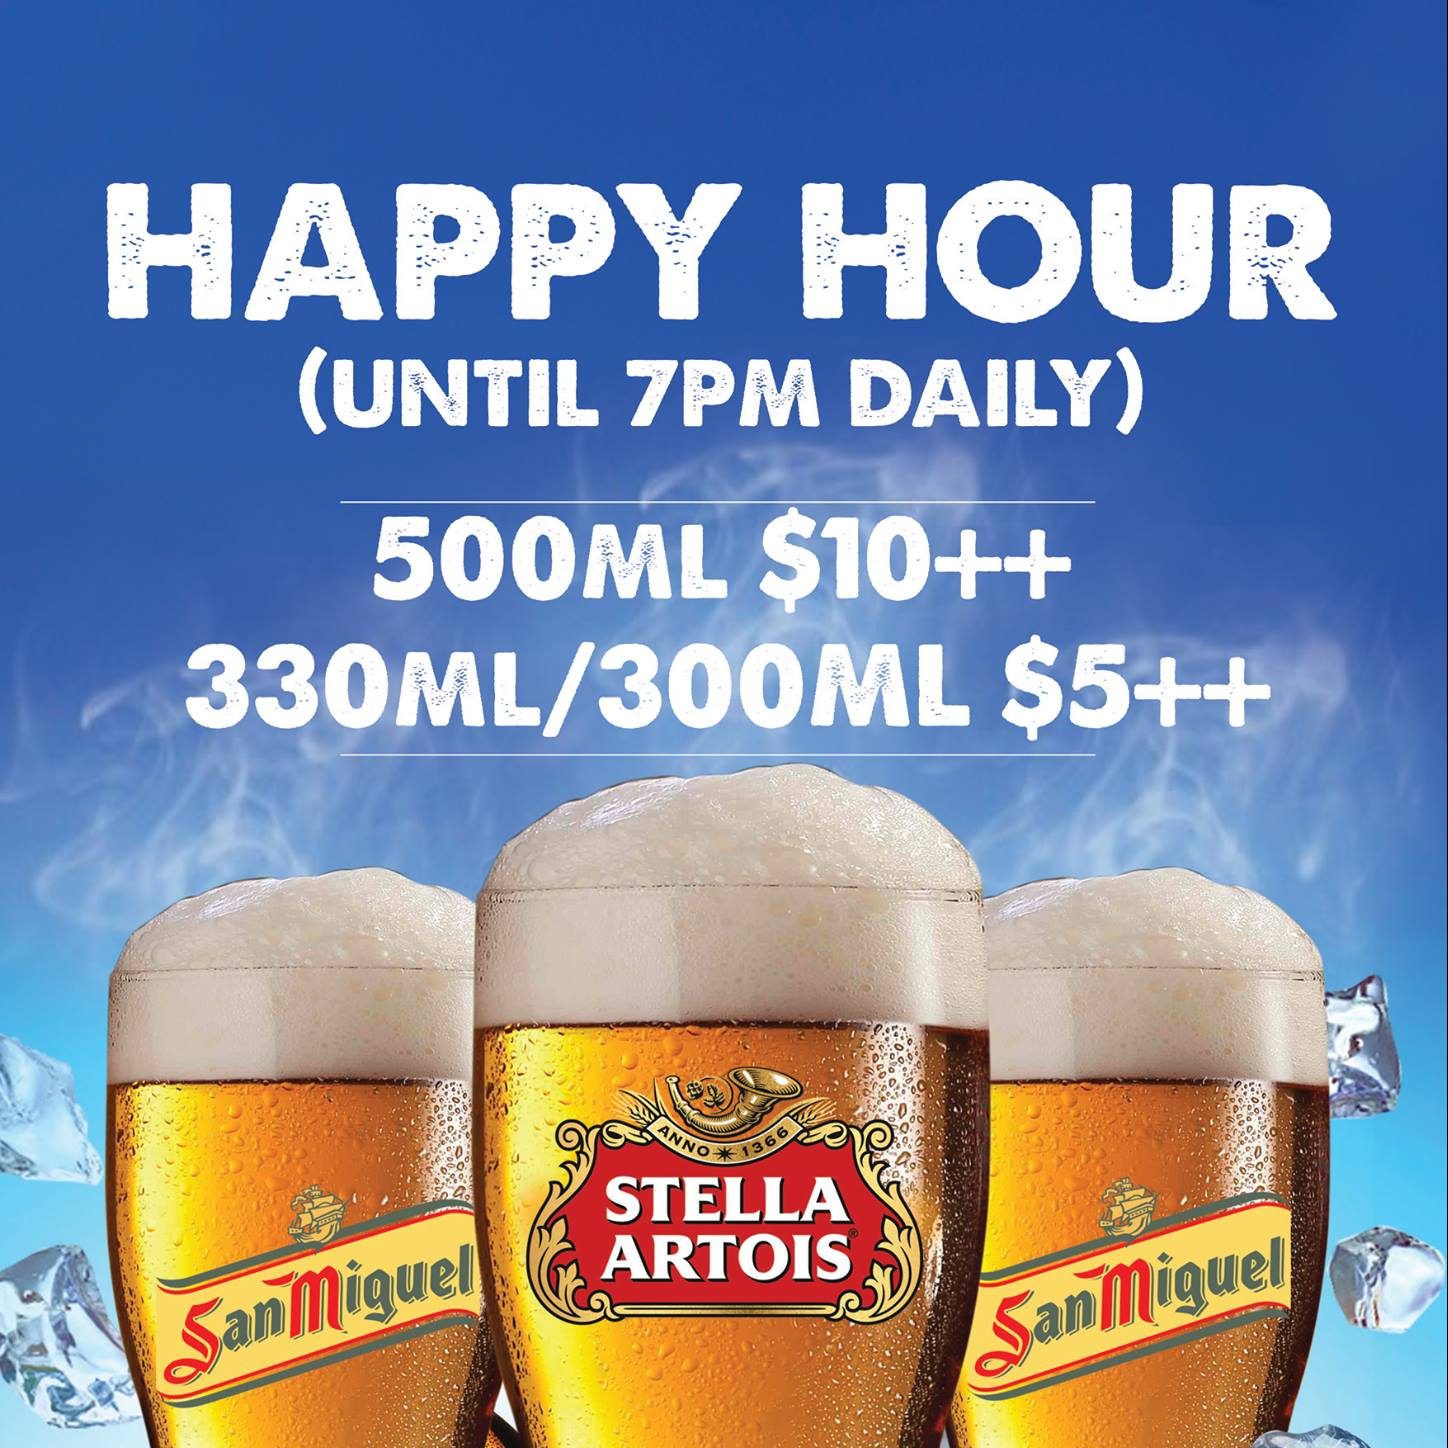 Chicken Up SG Happy Hour until 7pm Daily